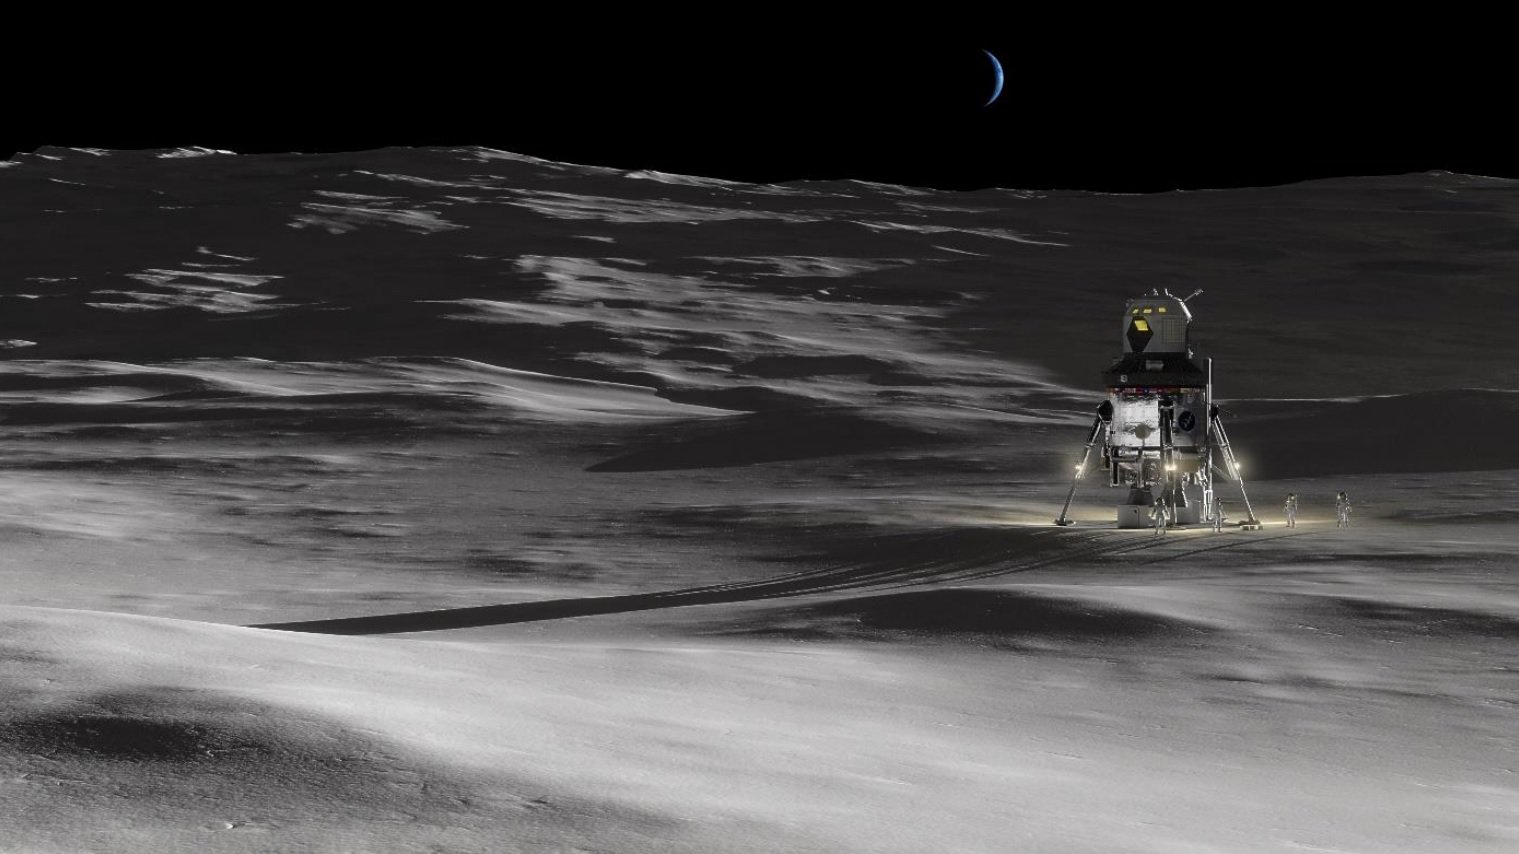 Lockheed Martin has introduced the concept of the lunar landing module for the station Gateway